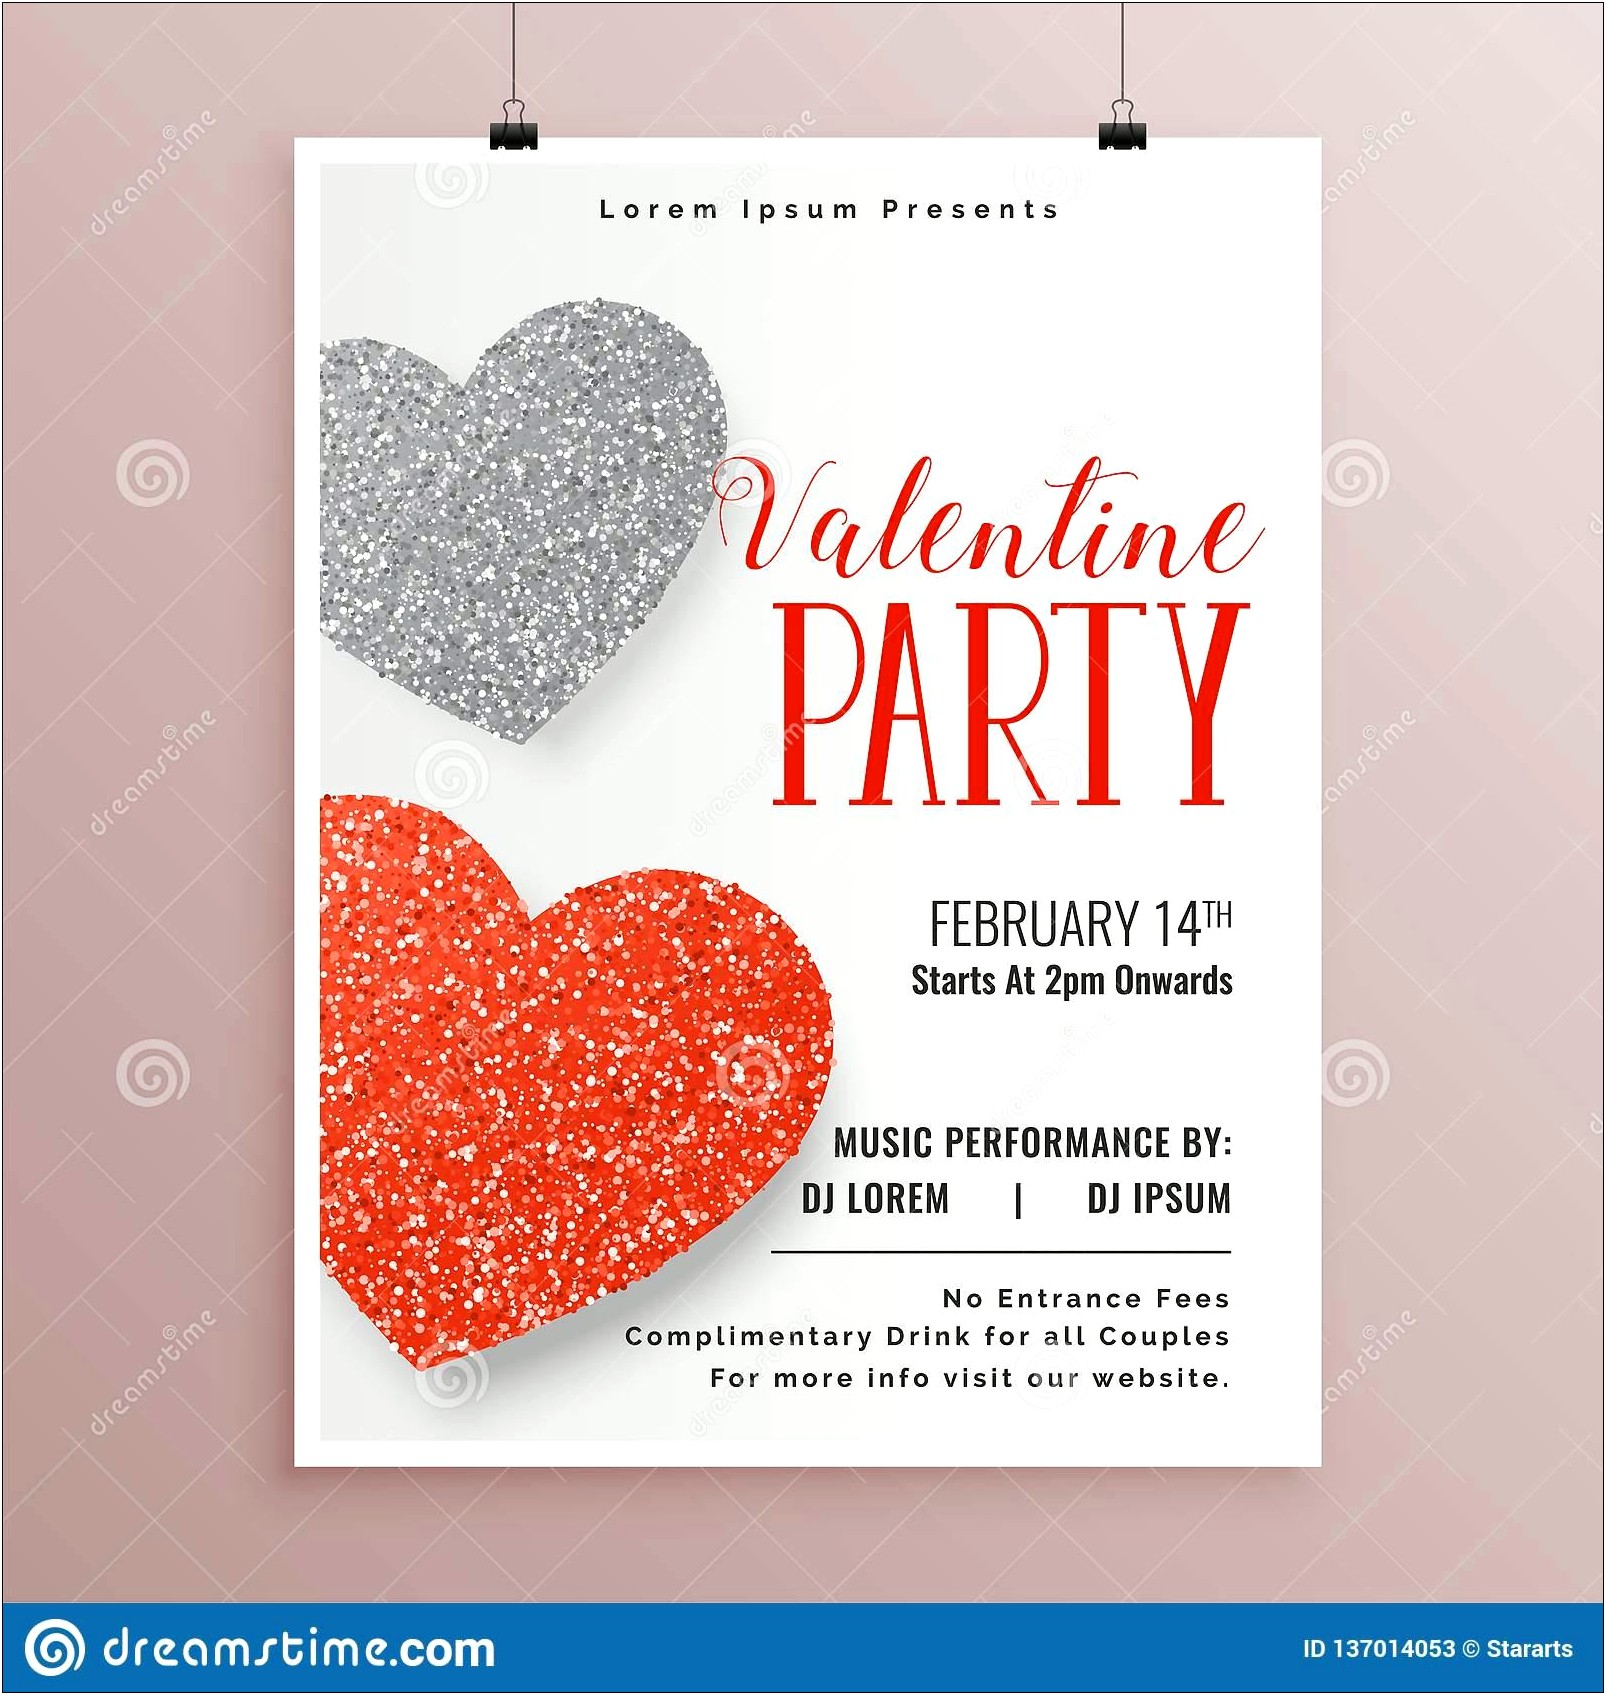 Valentine's Day Party Flyer Template Free